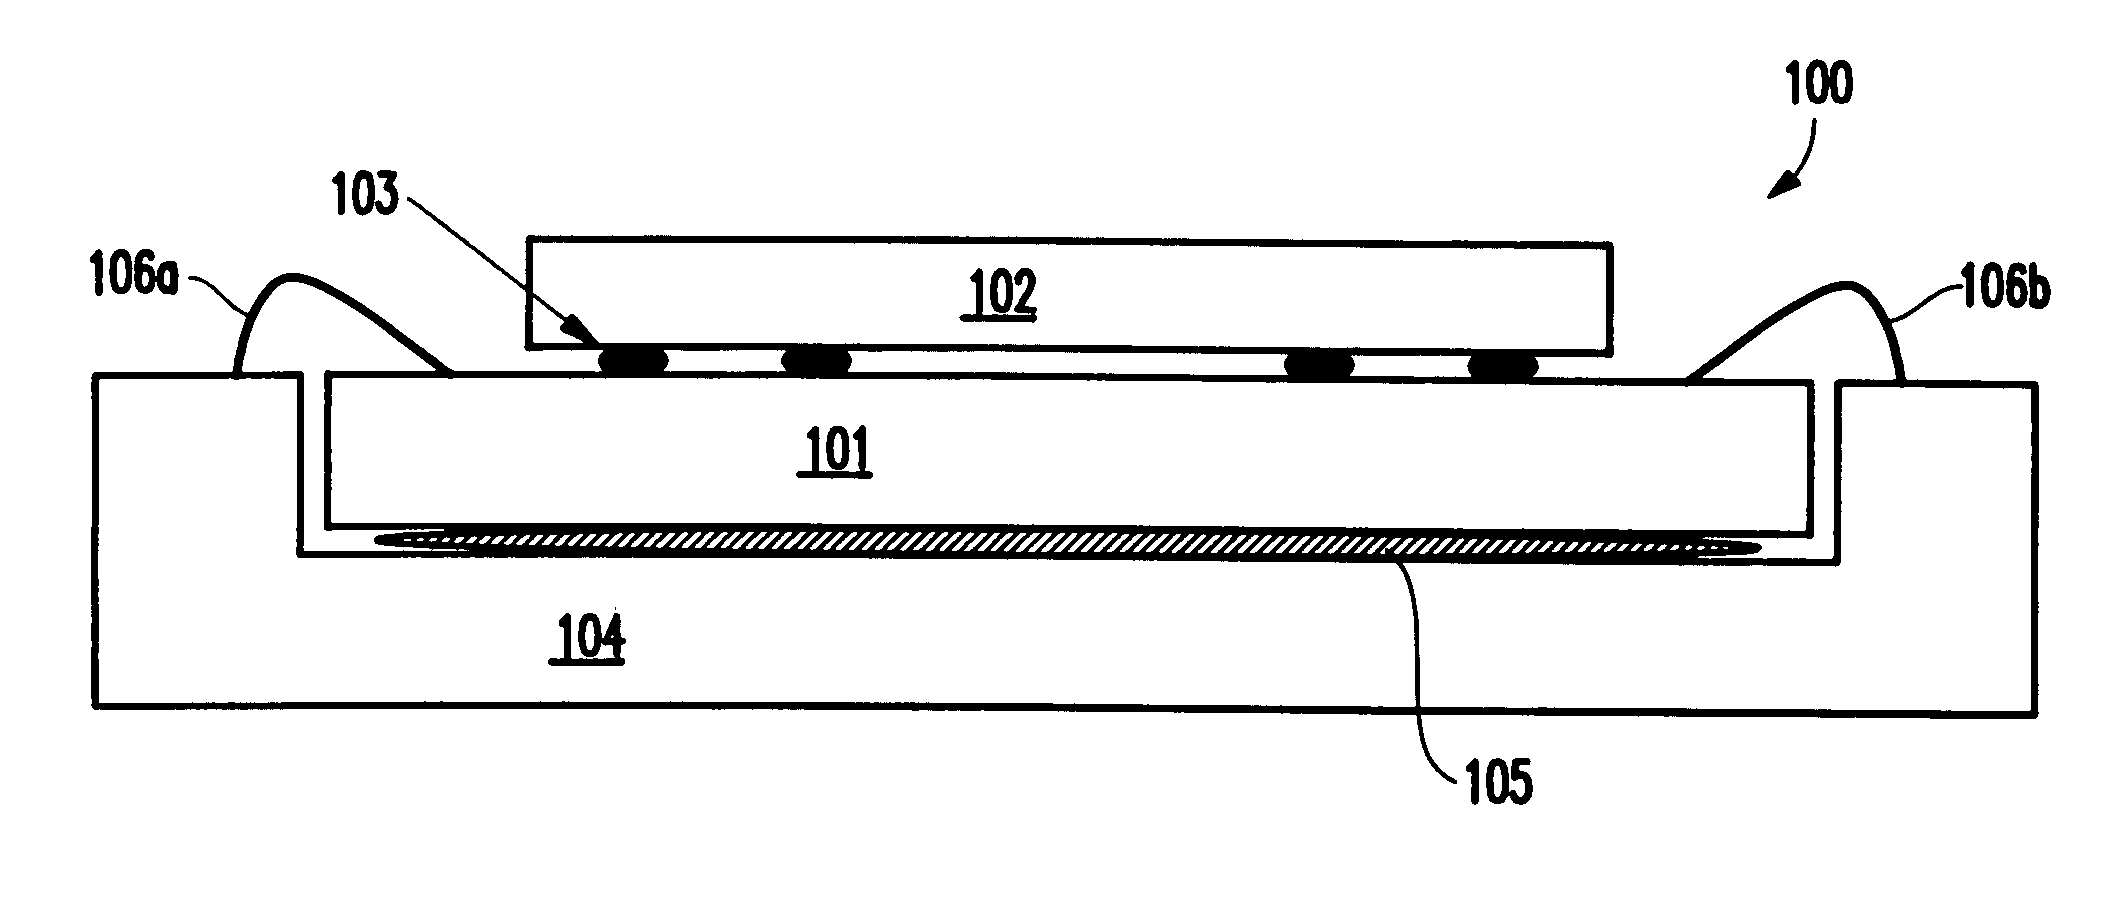 System level device for battery and integrated circuit integration